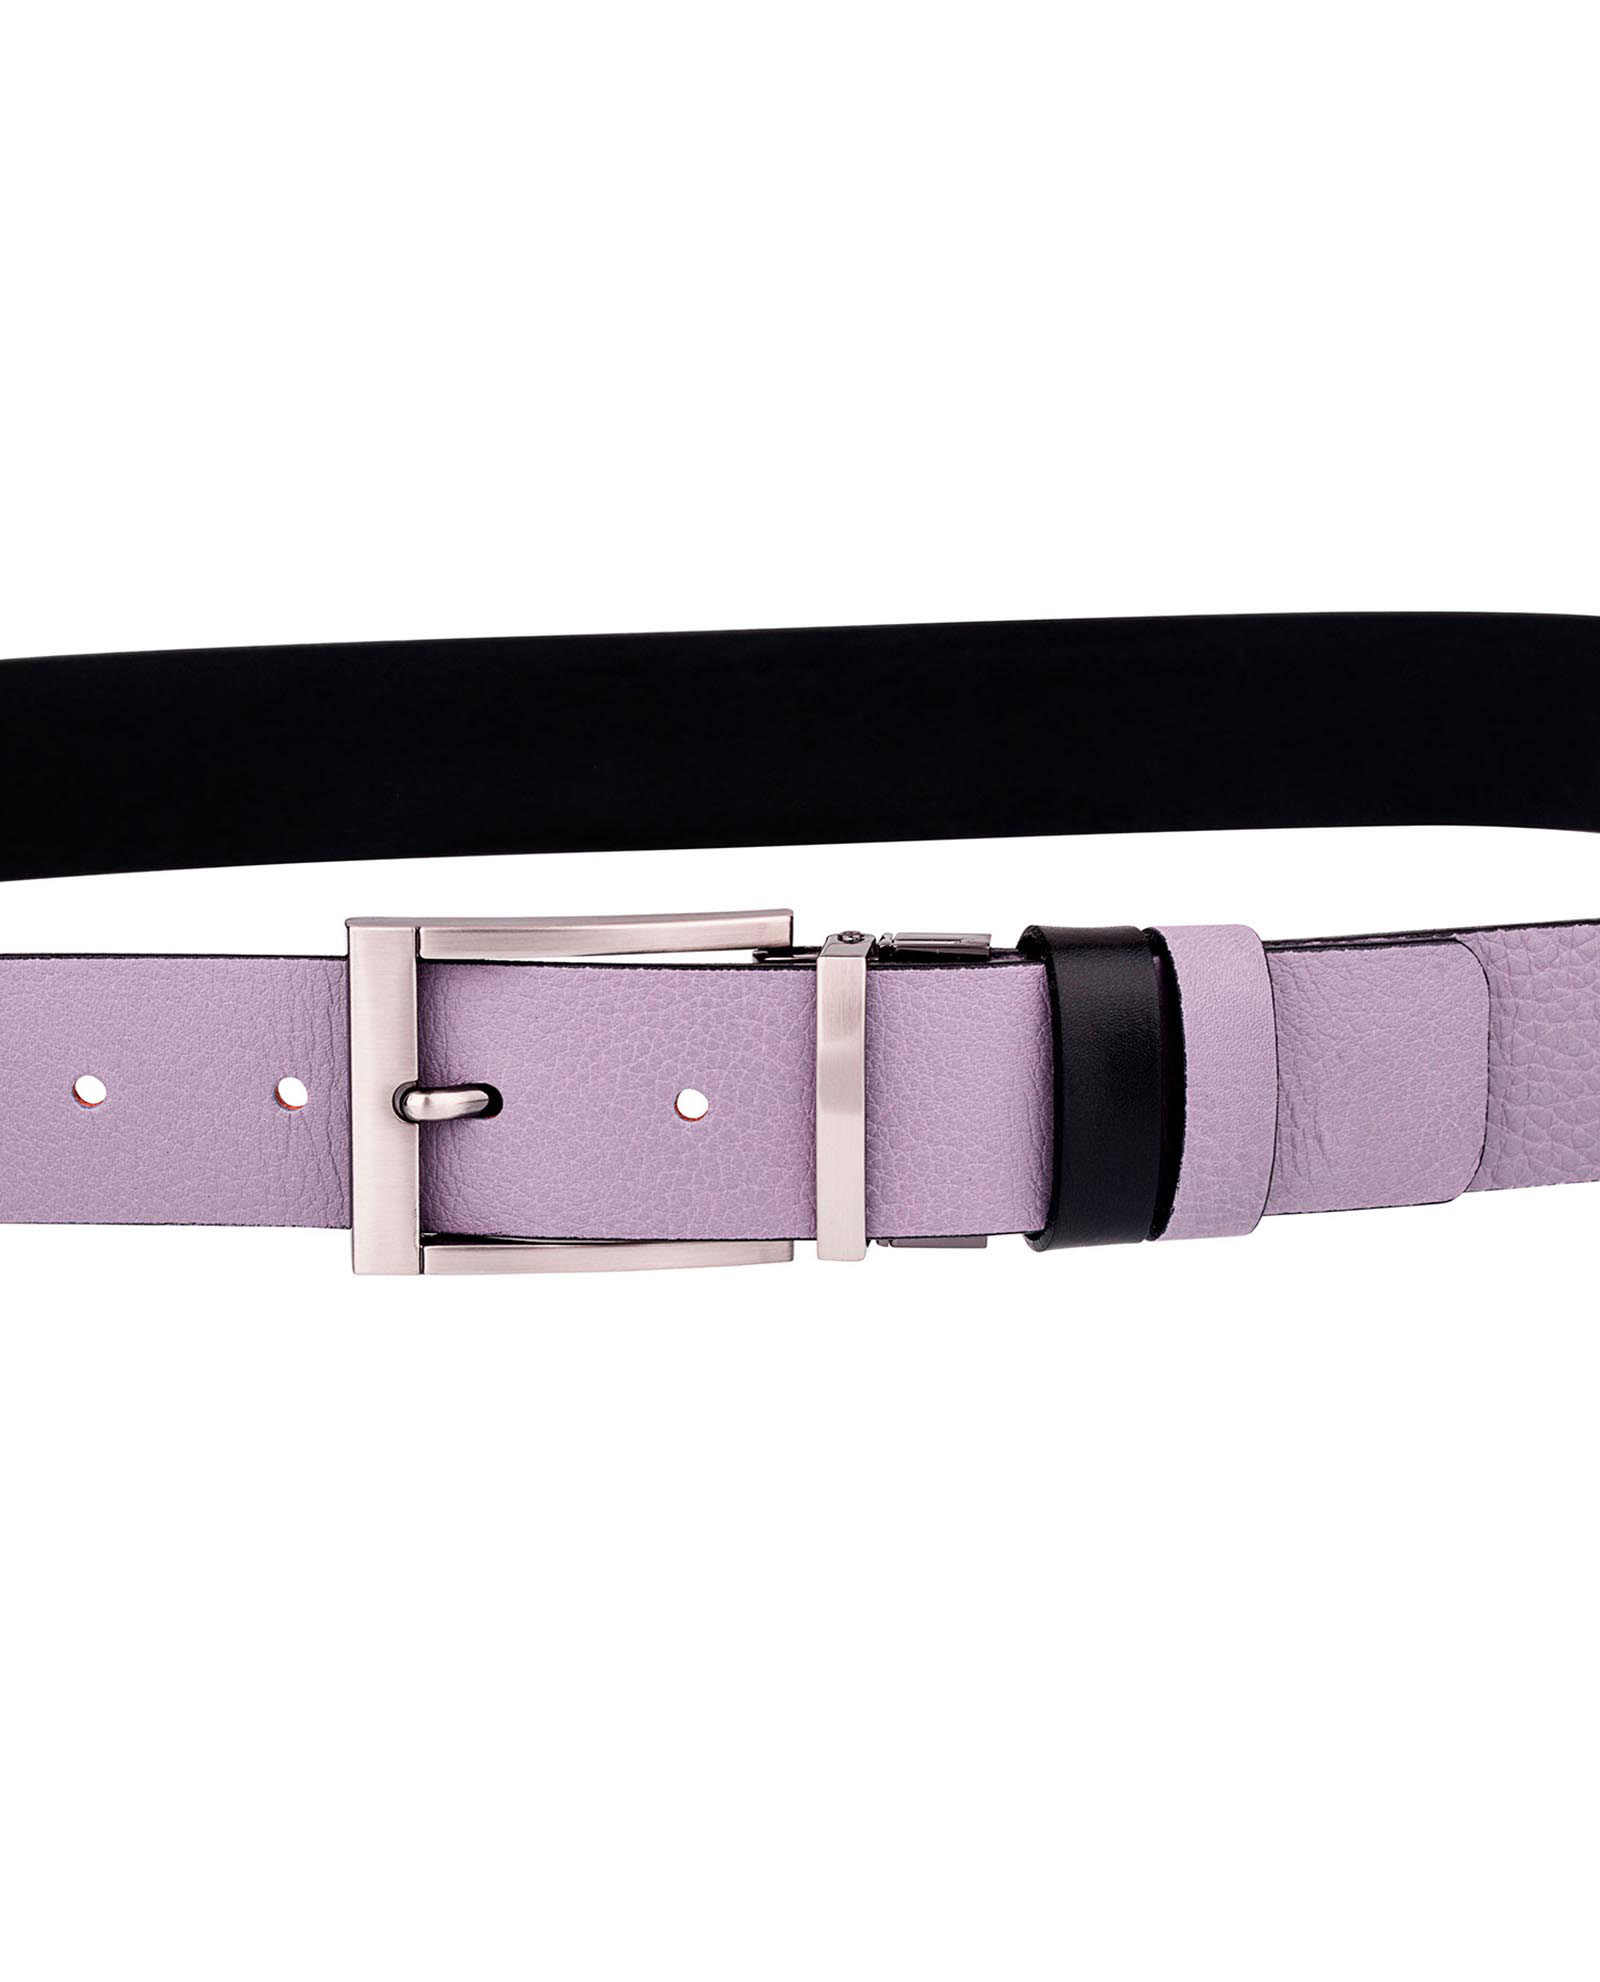 Buy Women's Lilac Leather Belt - Reversible - Free Shipping